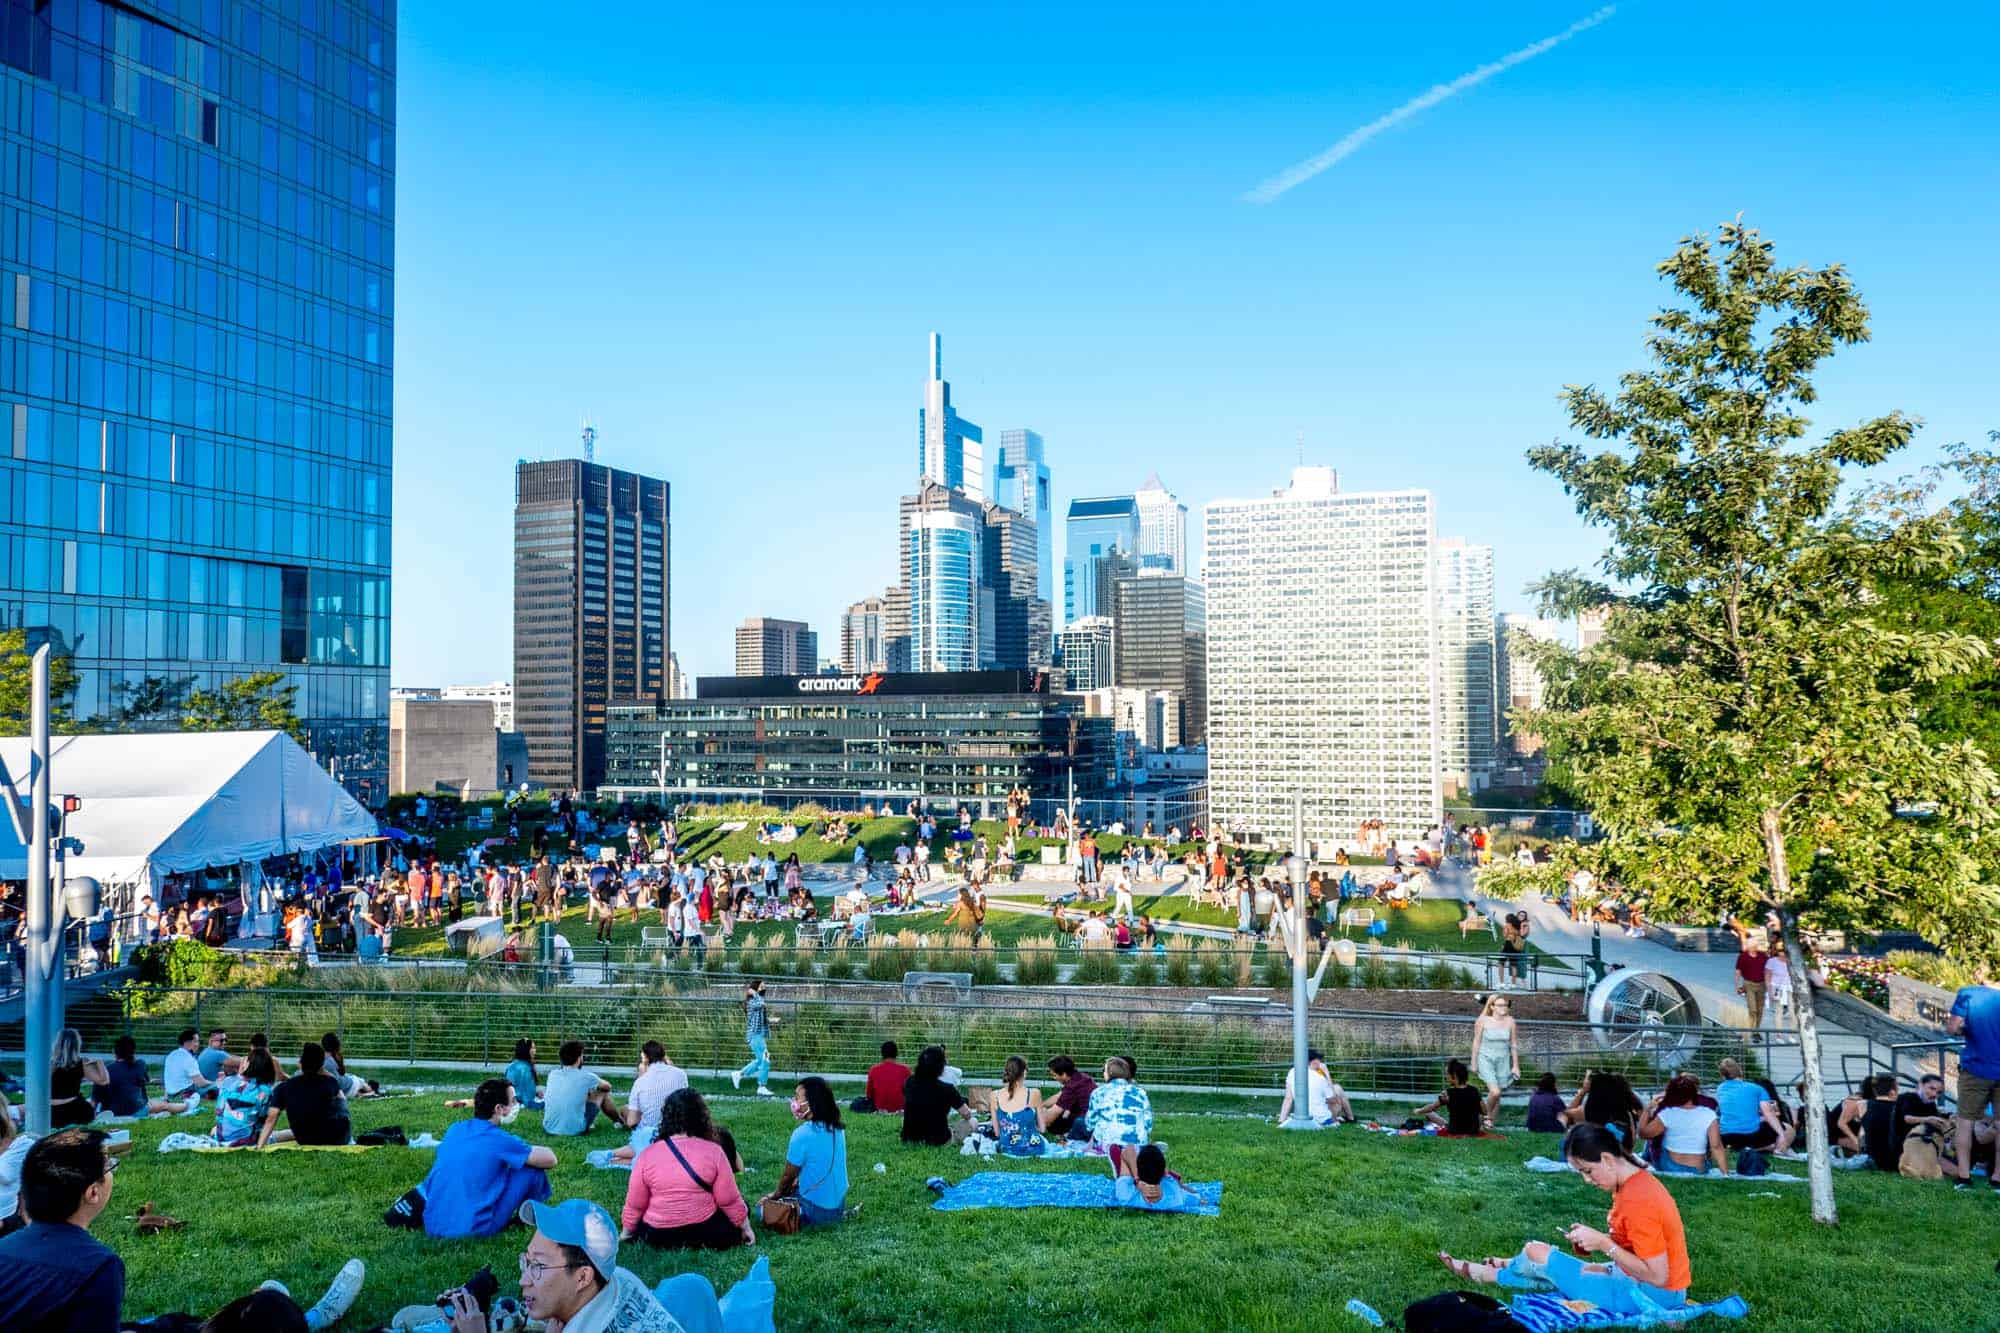 People on grassy lawn with Philadelphia skyline in background